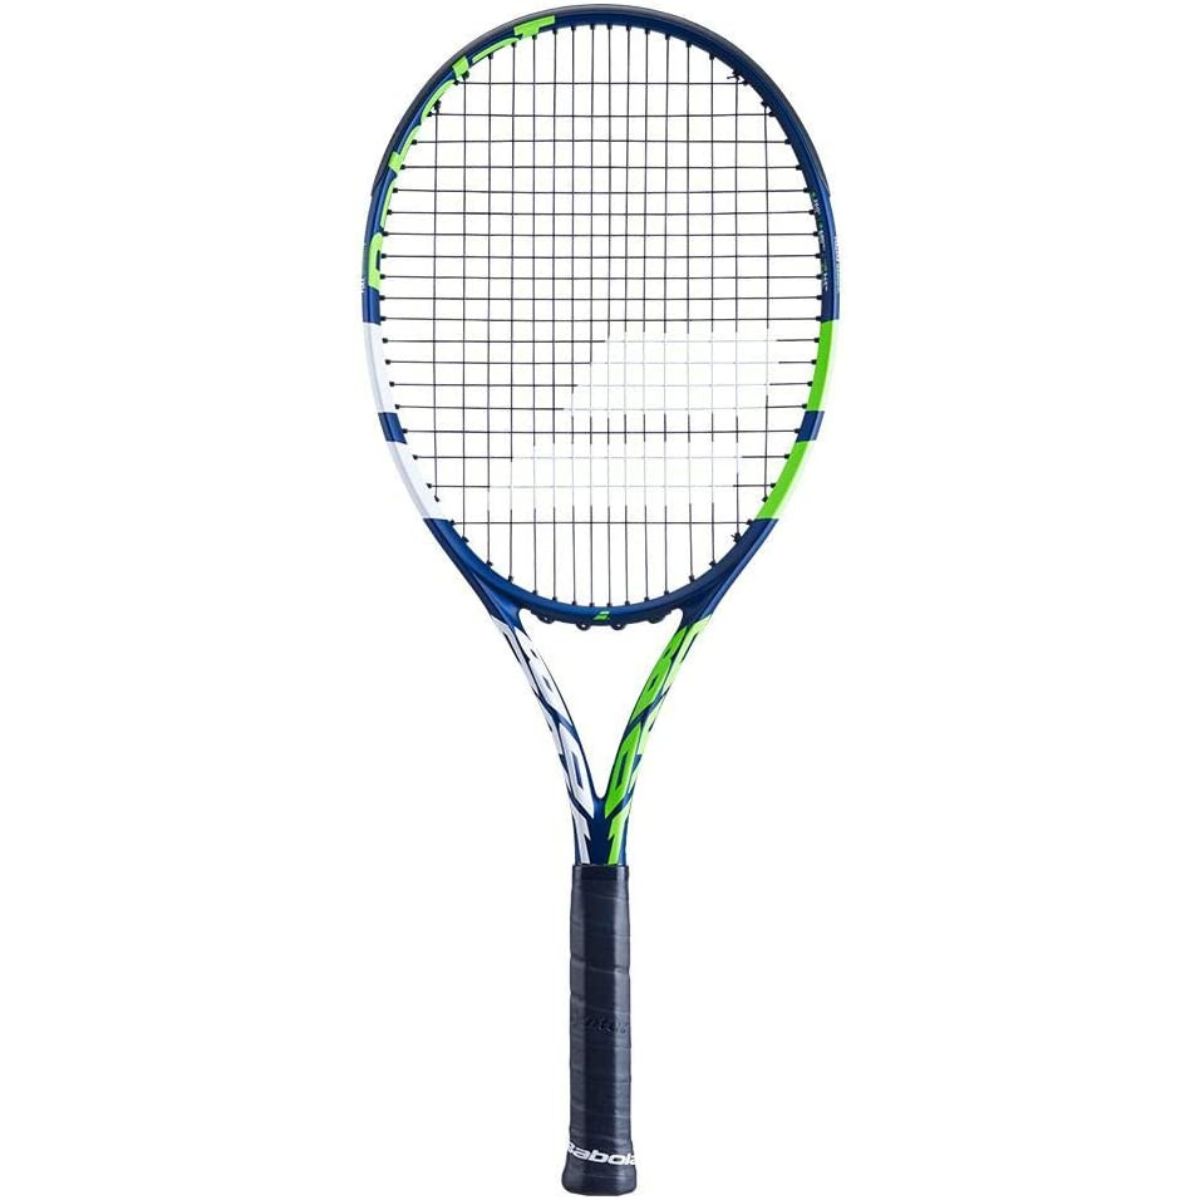 The Best Tennis Rackets Under $100 Options: Babolat 2021 Boost Drive